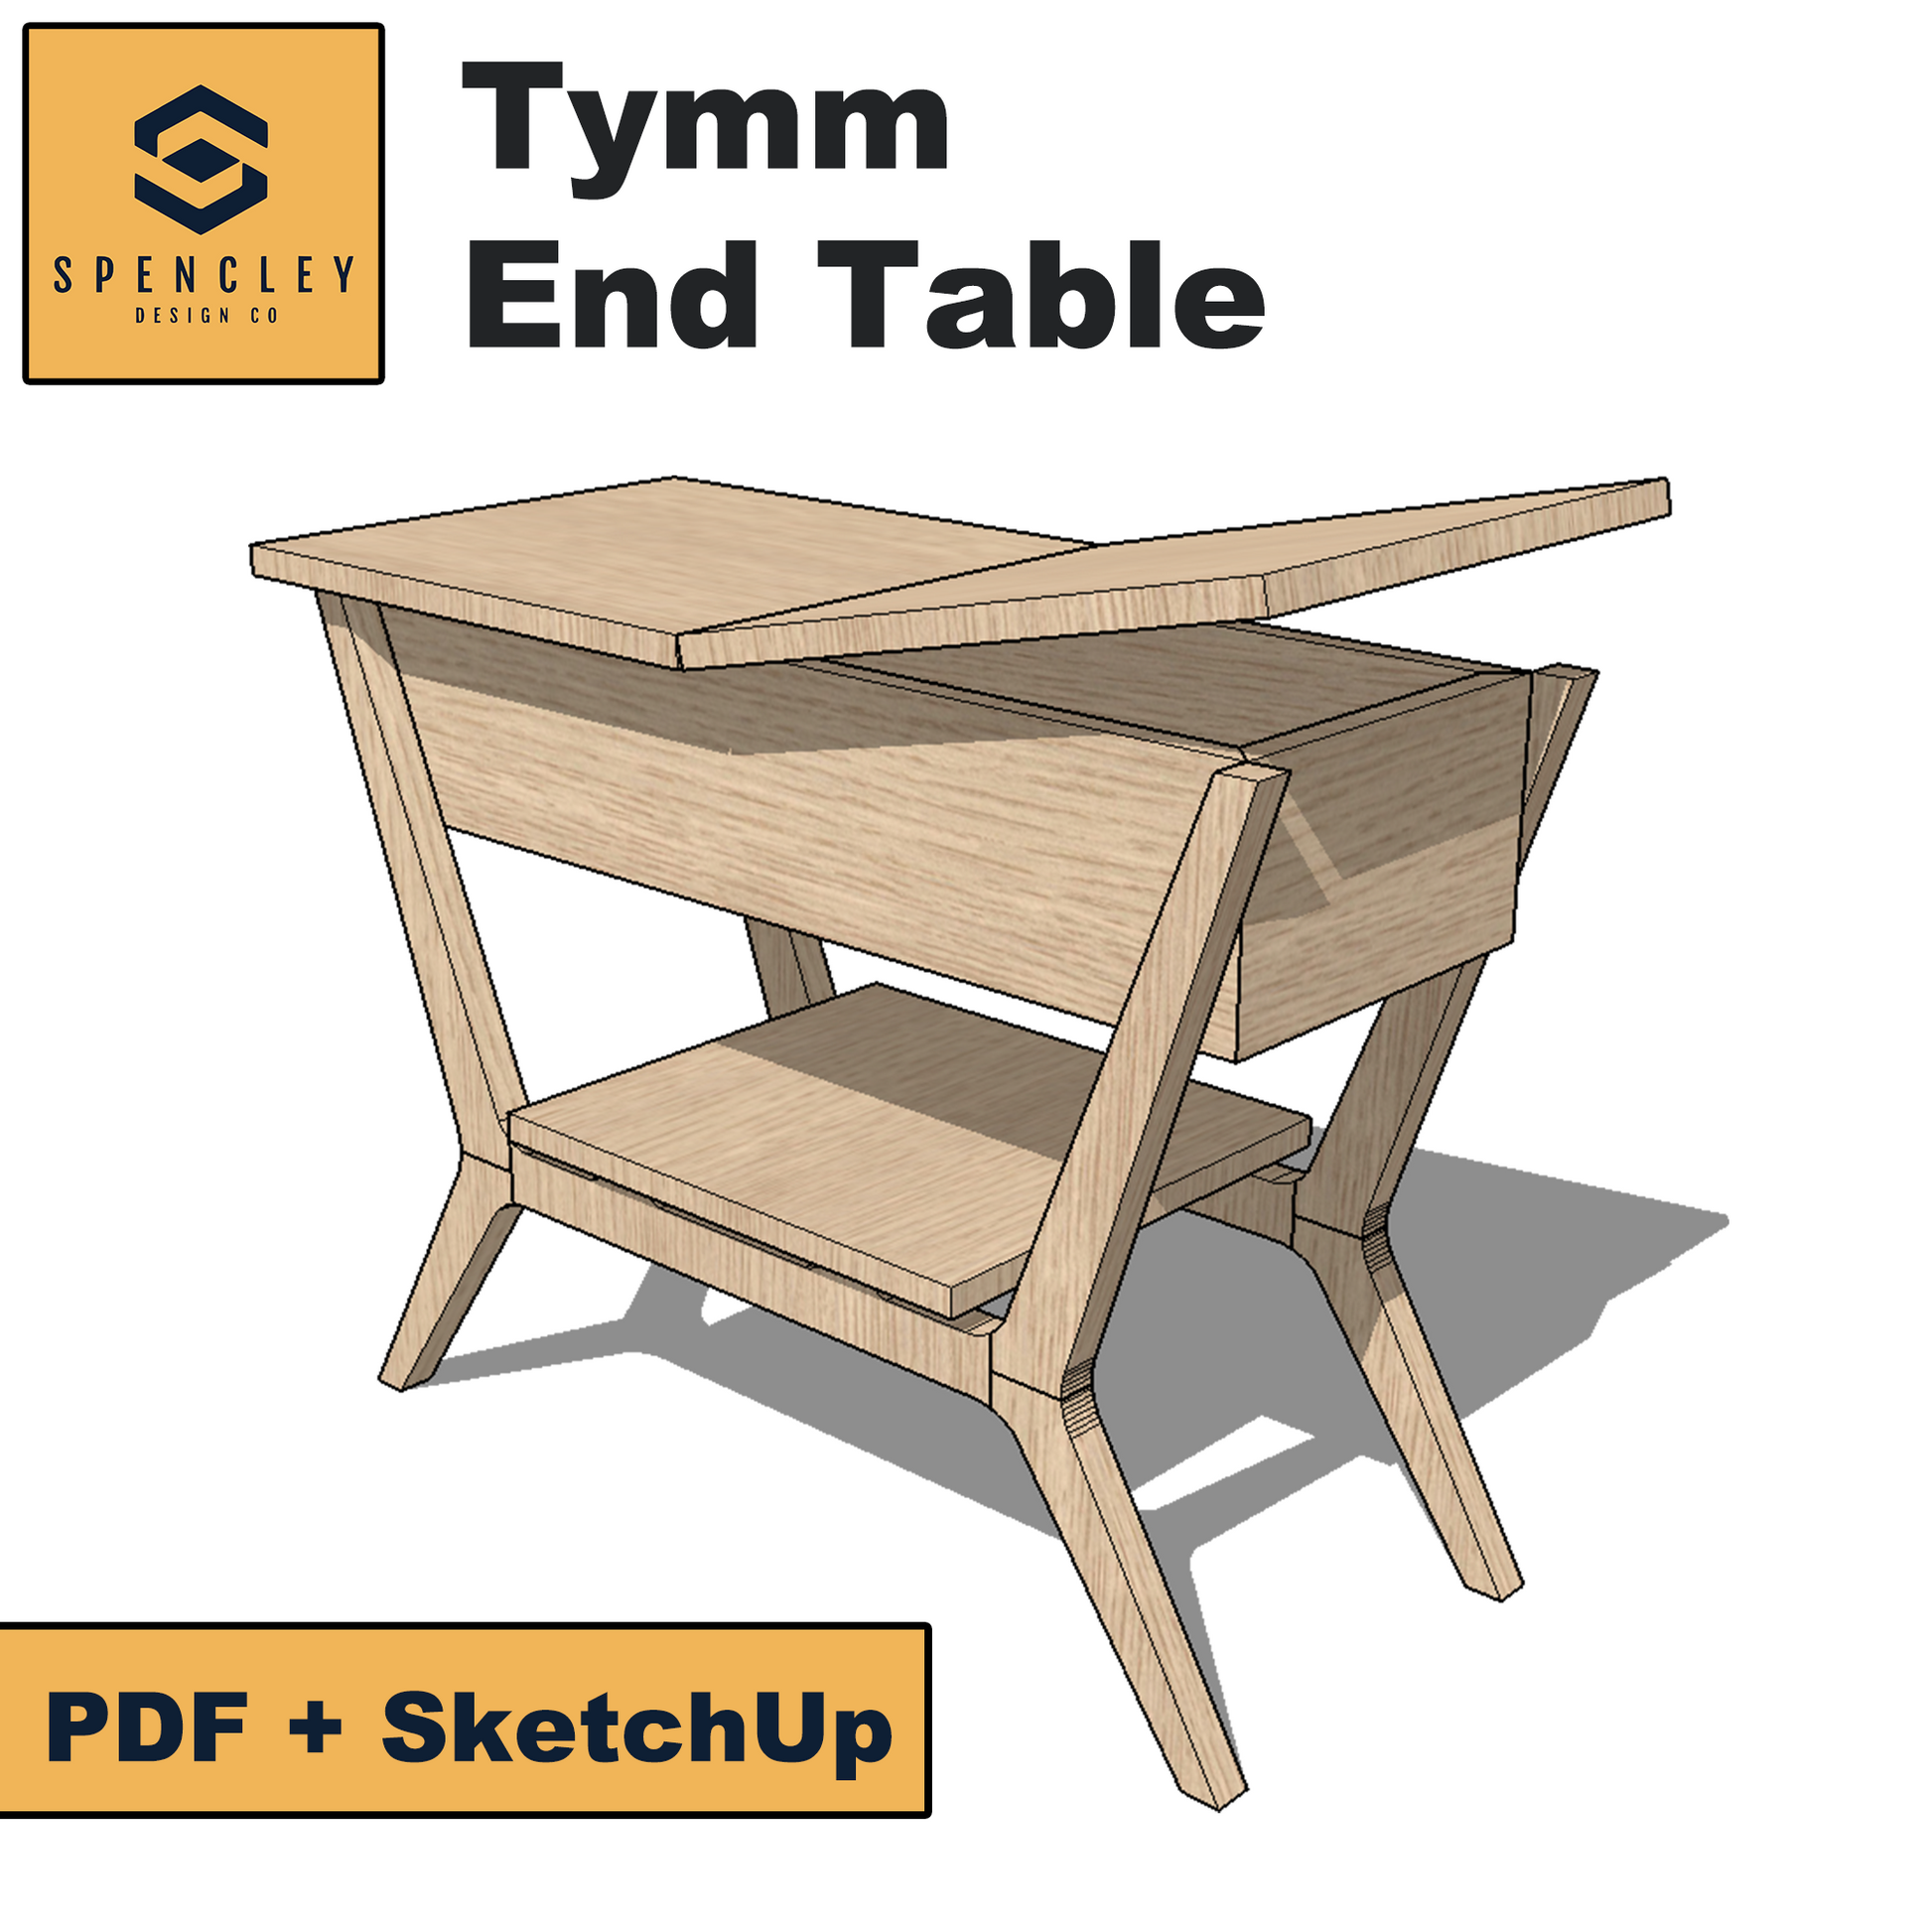 Spencley Design Co - TYMM END TABLE - PLANS